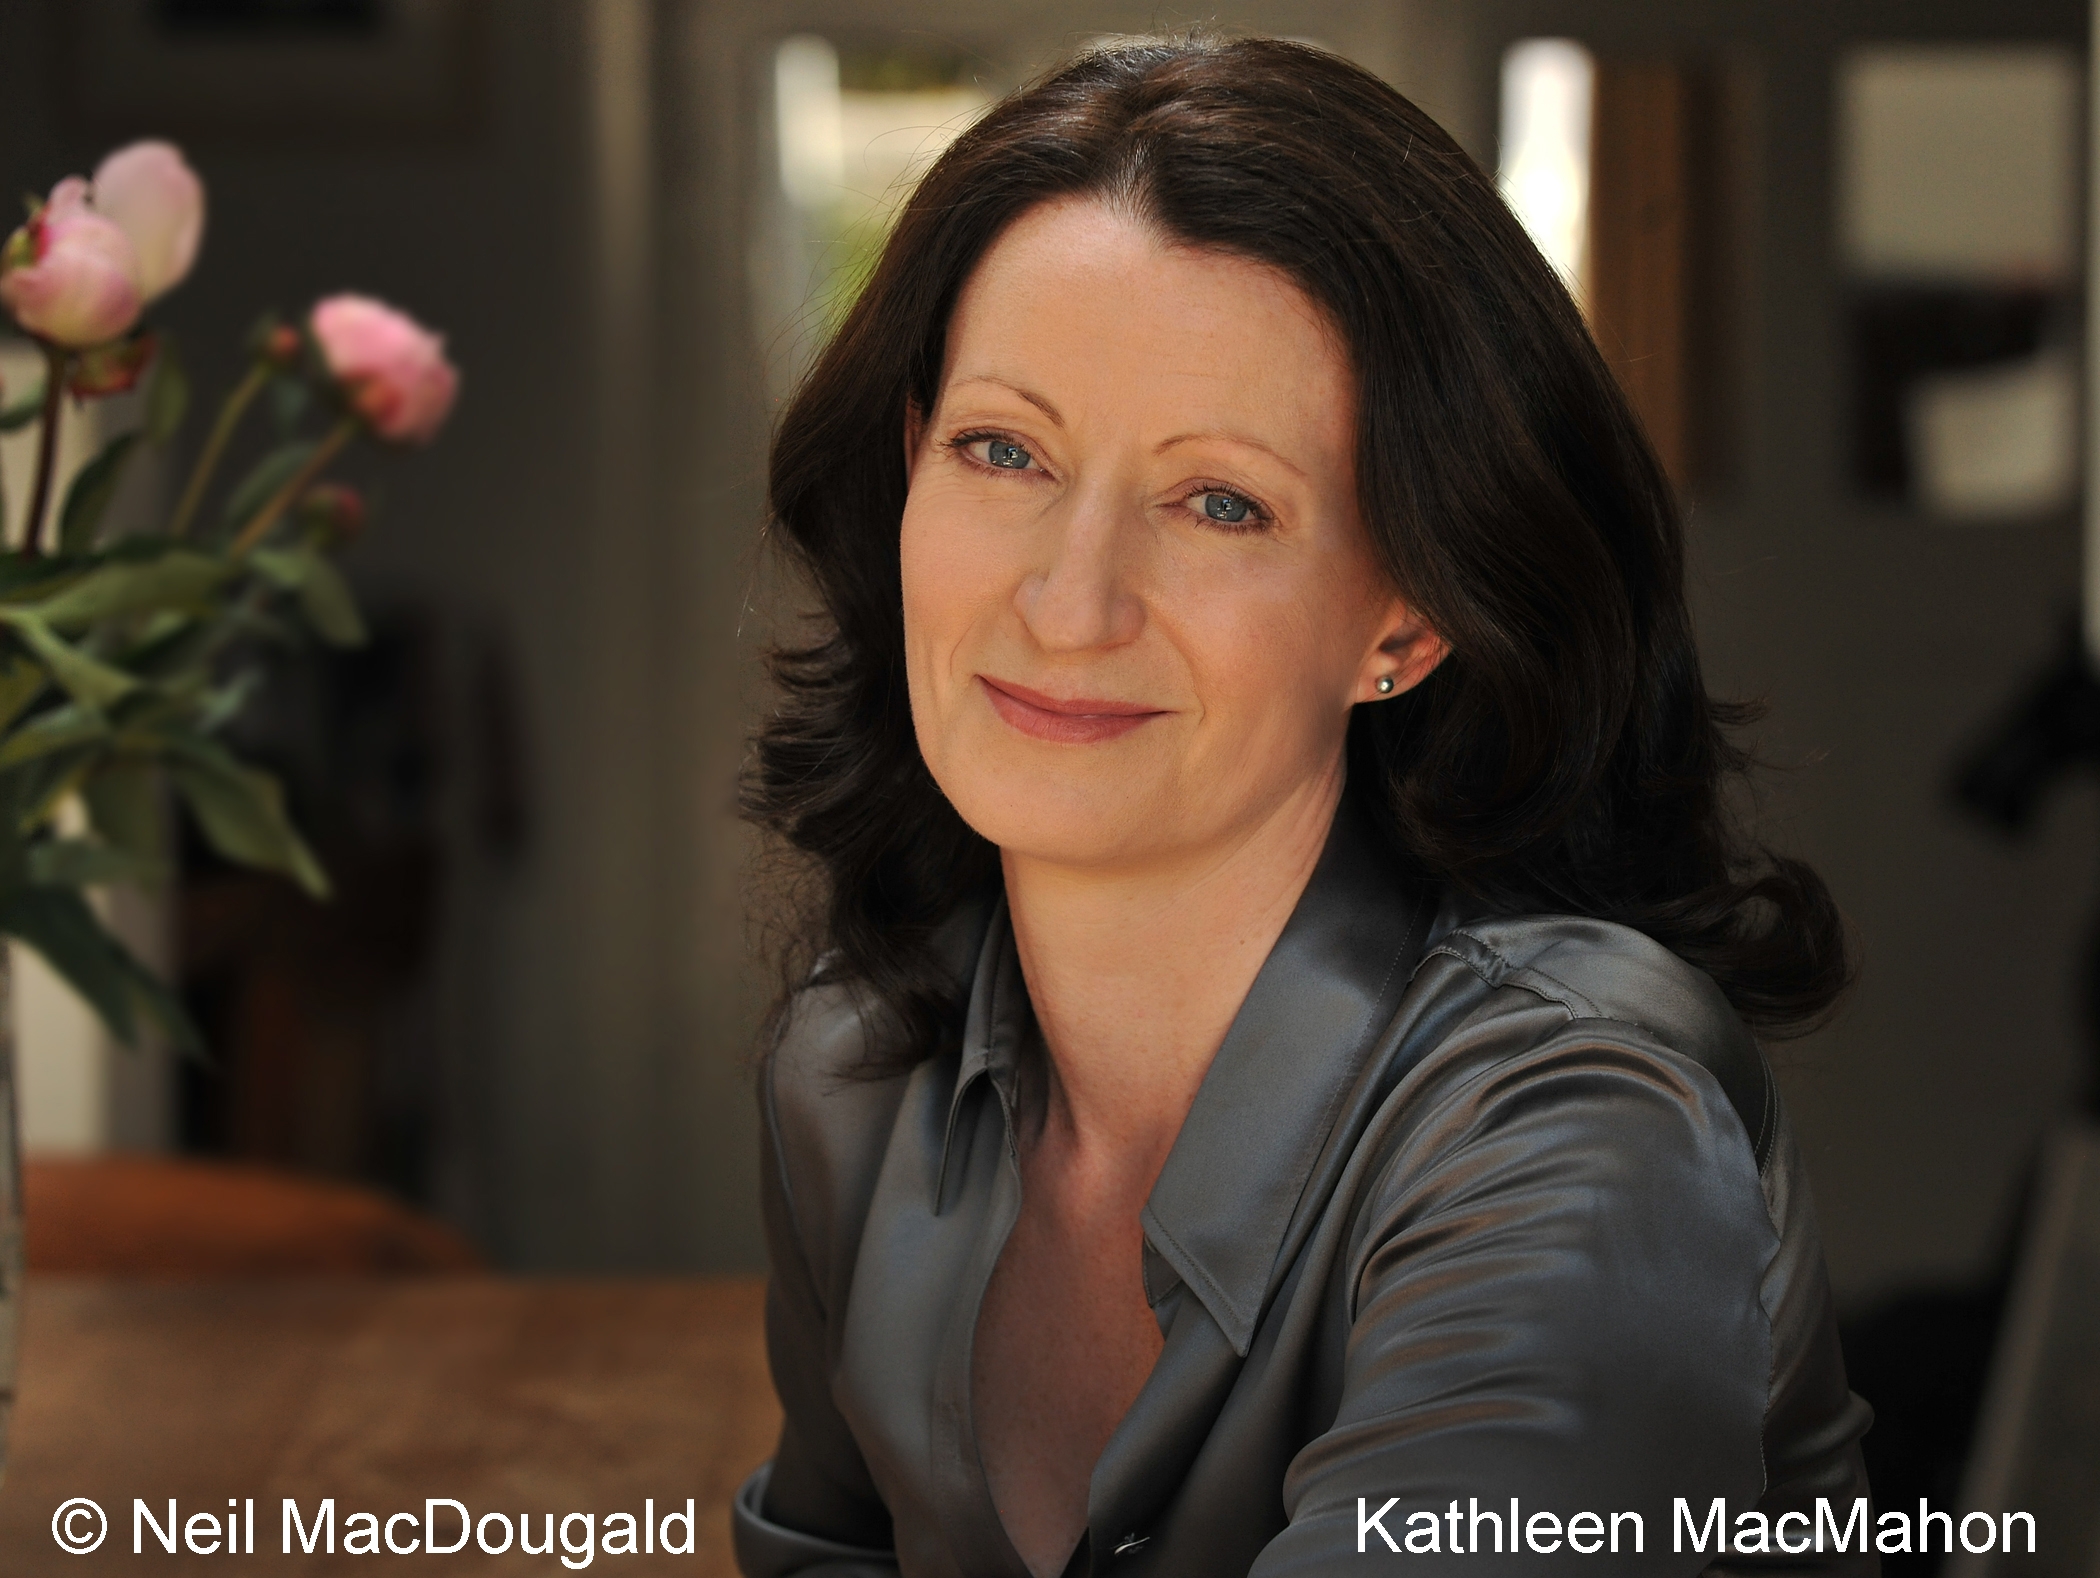 Kathleen McMahon: “I ended up abandoning that book and starting from scratch with another”